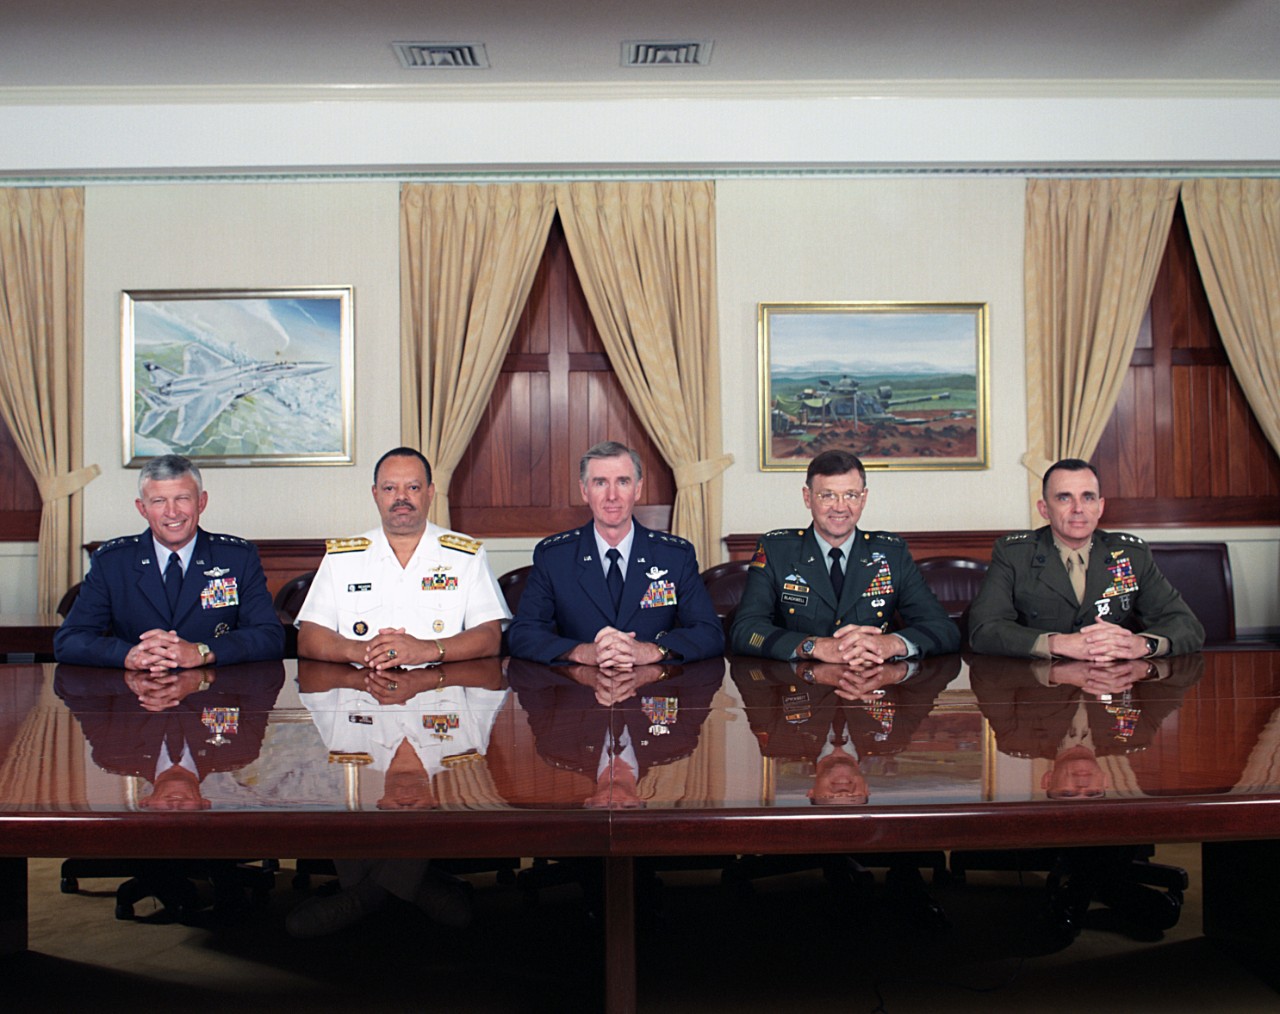 330-CFD-DD-SC-07-21487:   Formal Portrait: Joint Chiefs of STAFF, Operations Deputies Group, 1995.   Pictured left-to-right are: U.S. Air Force LT. GEN. Ralph E. Eberhart, Deputy CHIEF of STAFF for Plans and Operations; U.S. Navy Vice Adm. J. Paul Reason, Deputy CHIEF of Naval Operations for Plans, Policy, and Operations; U.S. Air Force LT. GEN. Walter Kross, Director, Joint STAFF; U.S. Army LT. GEN. Paul E. Blackwell, Deputy CHIEF of STAFF for Operations at Headquarter, Department of the Army; and U.S. Marine Corps LT. GEN. Arthur C. Blades, Deputy CHIEF of STAFF for Plans, Policies, and Operations, Marine Headquarters, July 5, 1995. OSD Package No. A07D-00345.   Official Department of Defense photograph, now in the collection of the National Archives. 